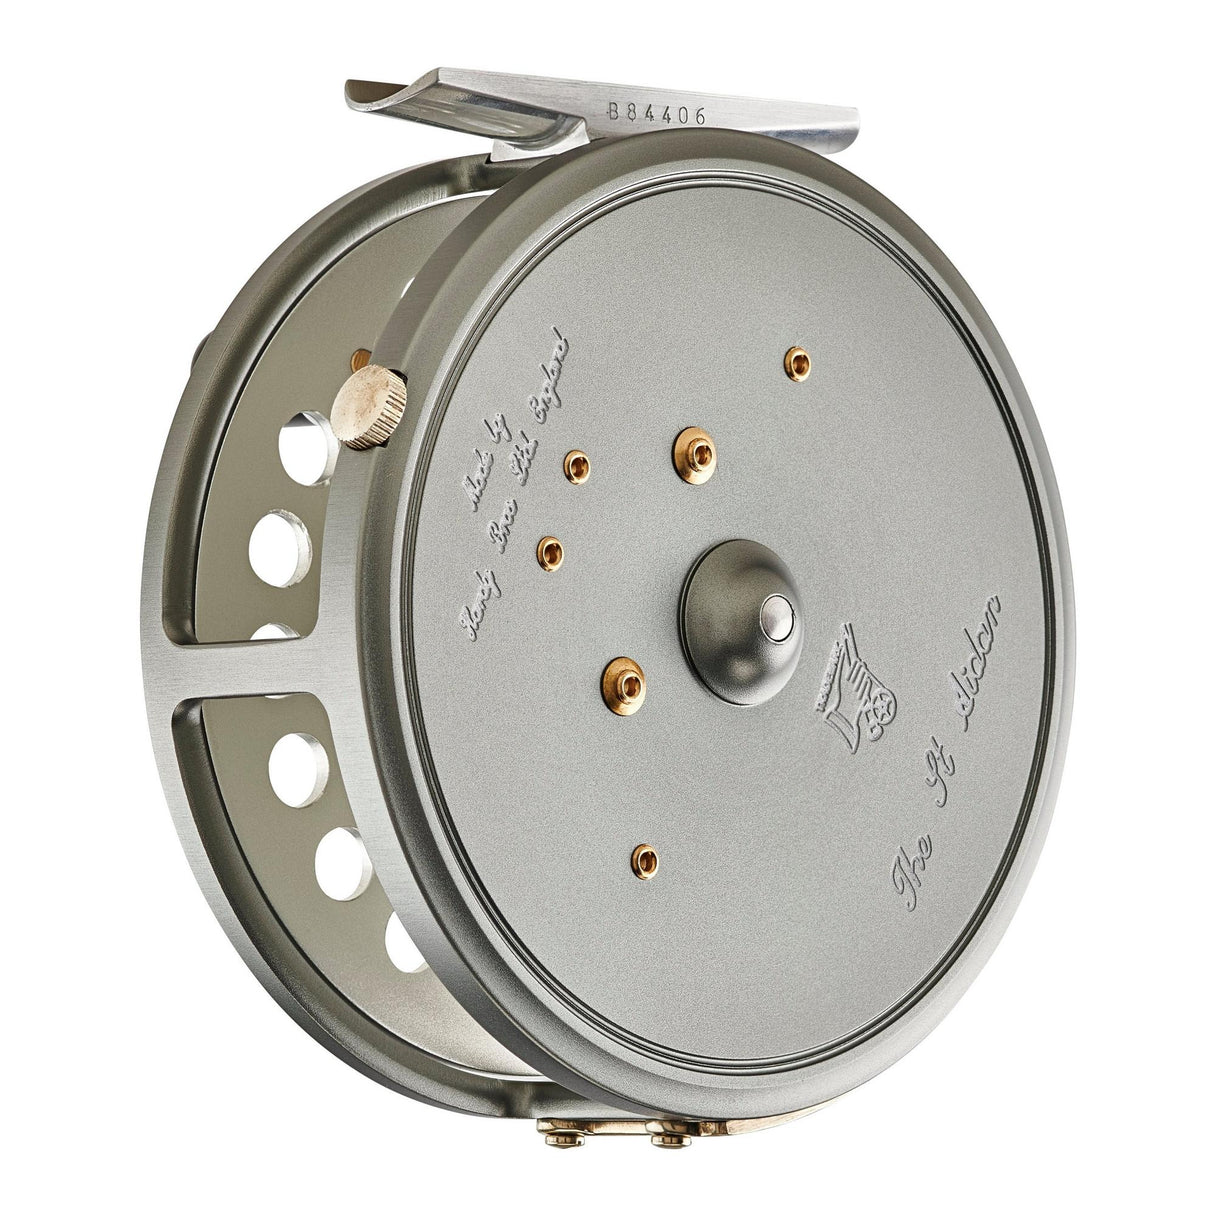 Hardy Featherweight 150th Anniversary Reel - Salmon River Fly Box